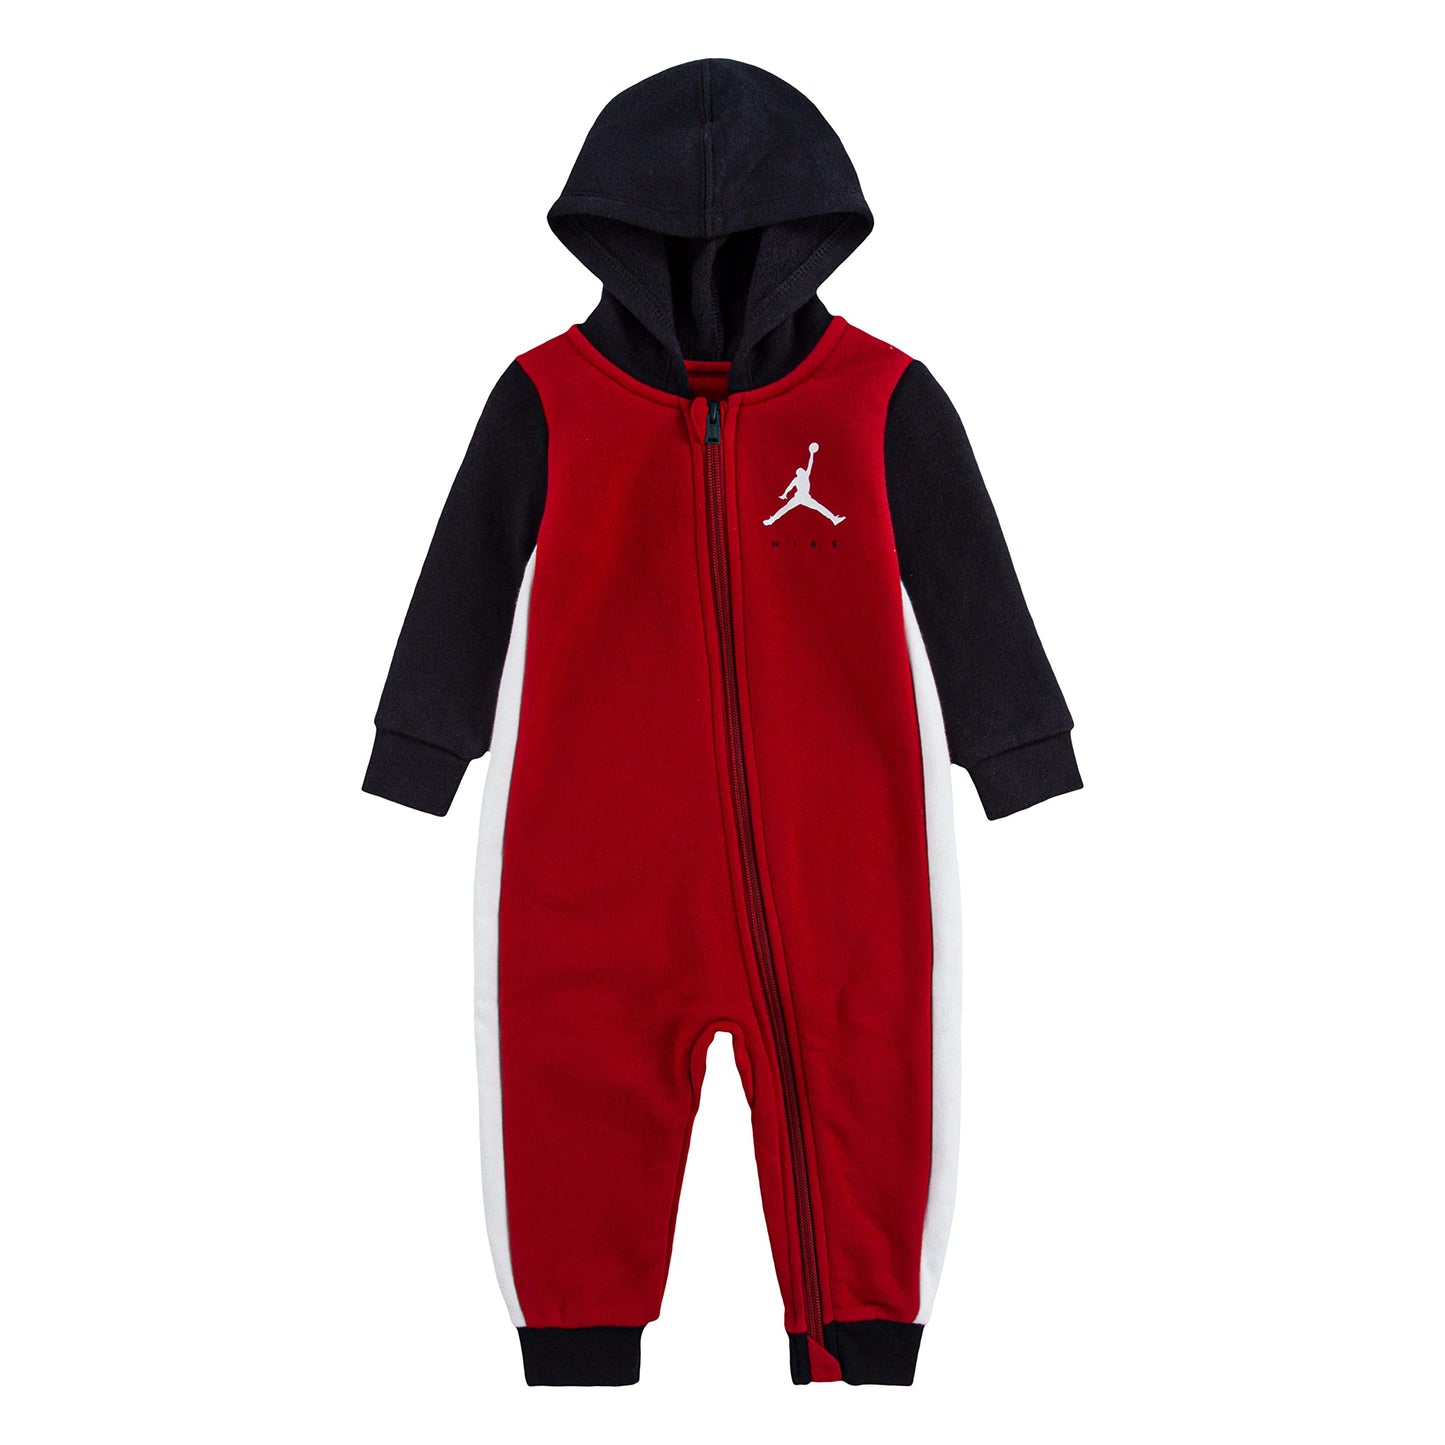 Image 1 of Jumpman By Nike Coverall (Infant)